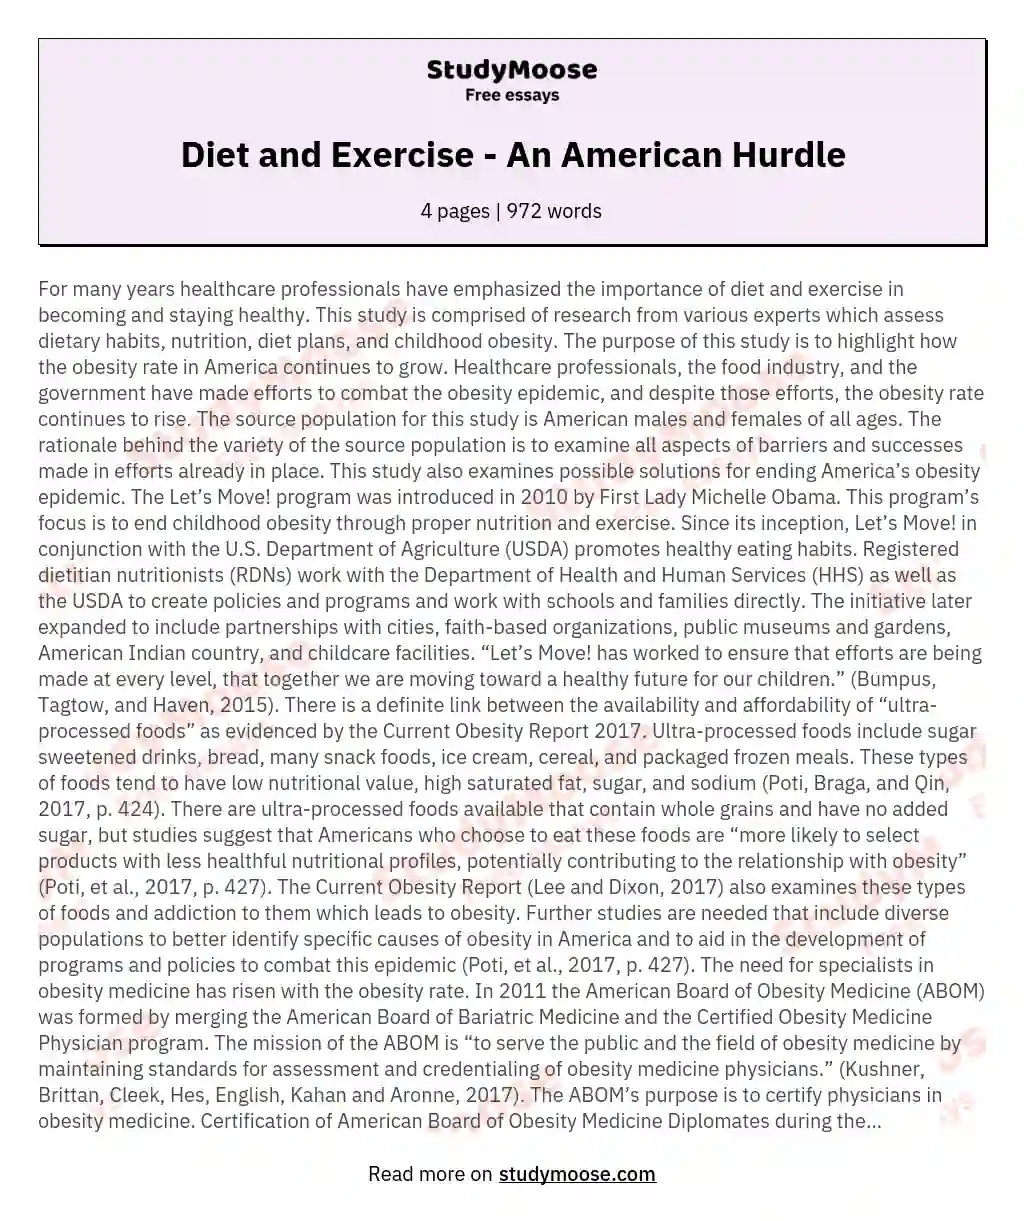 Diet and Exercise - An American Hurdle essay